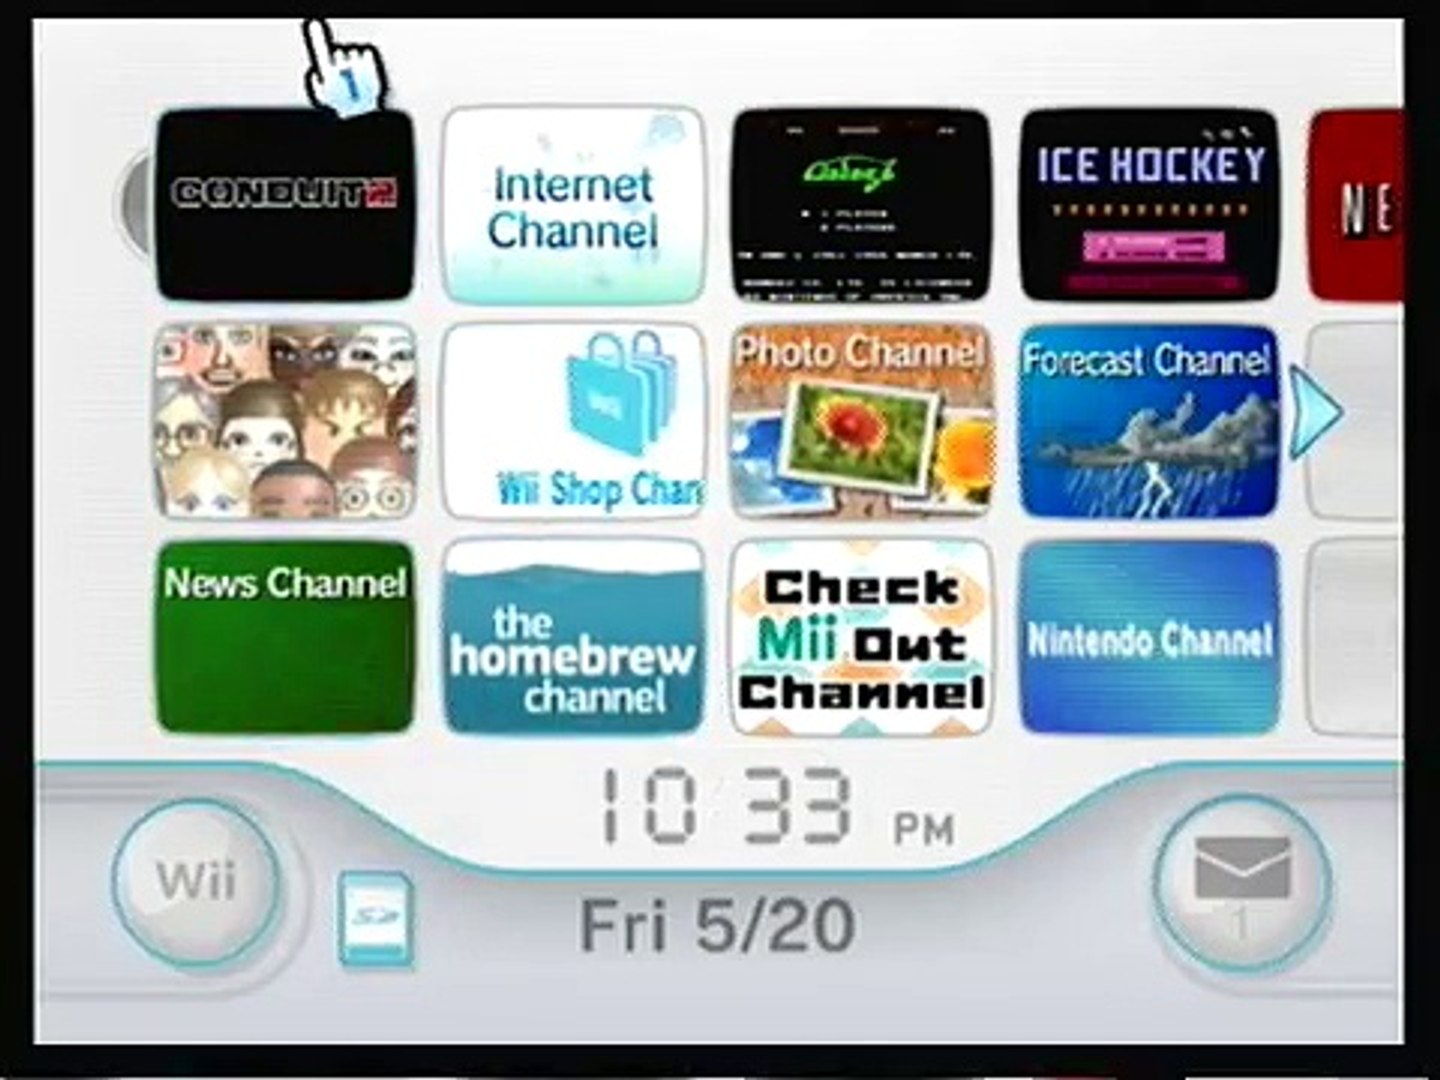 wii channel